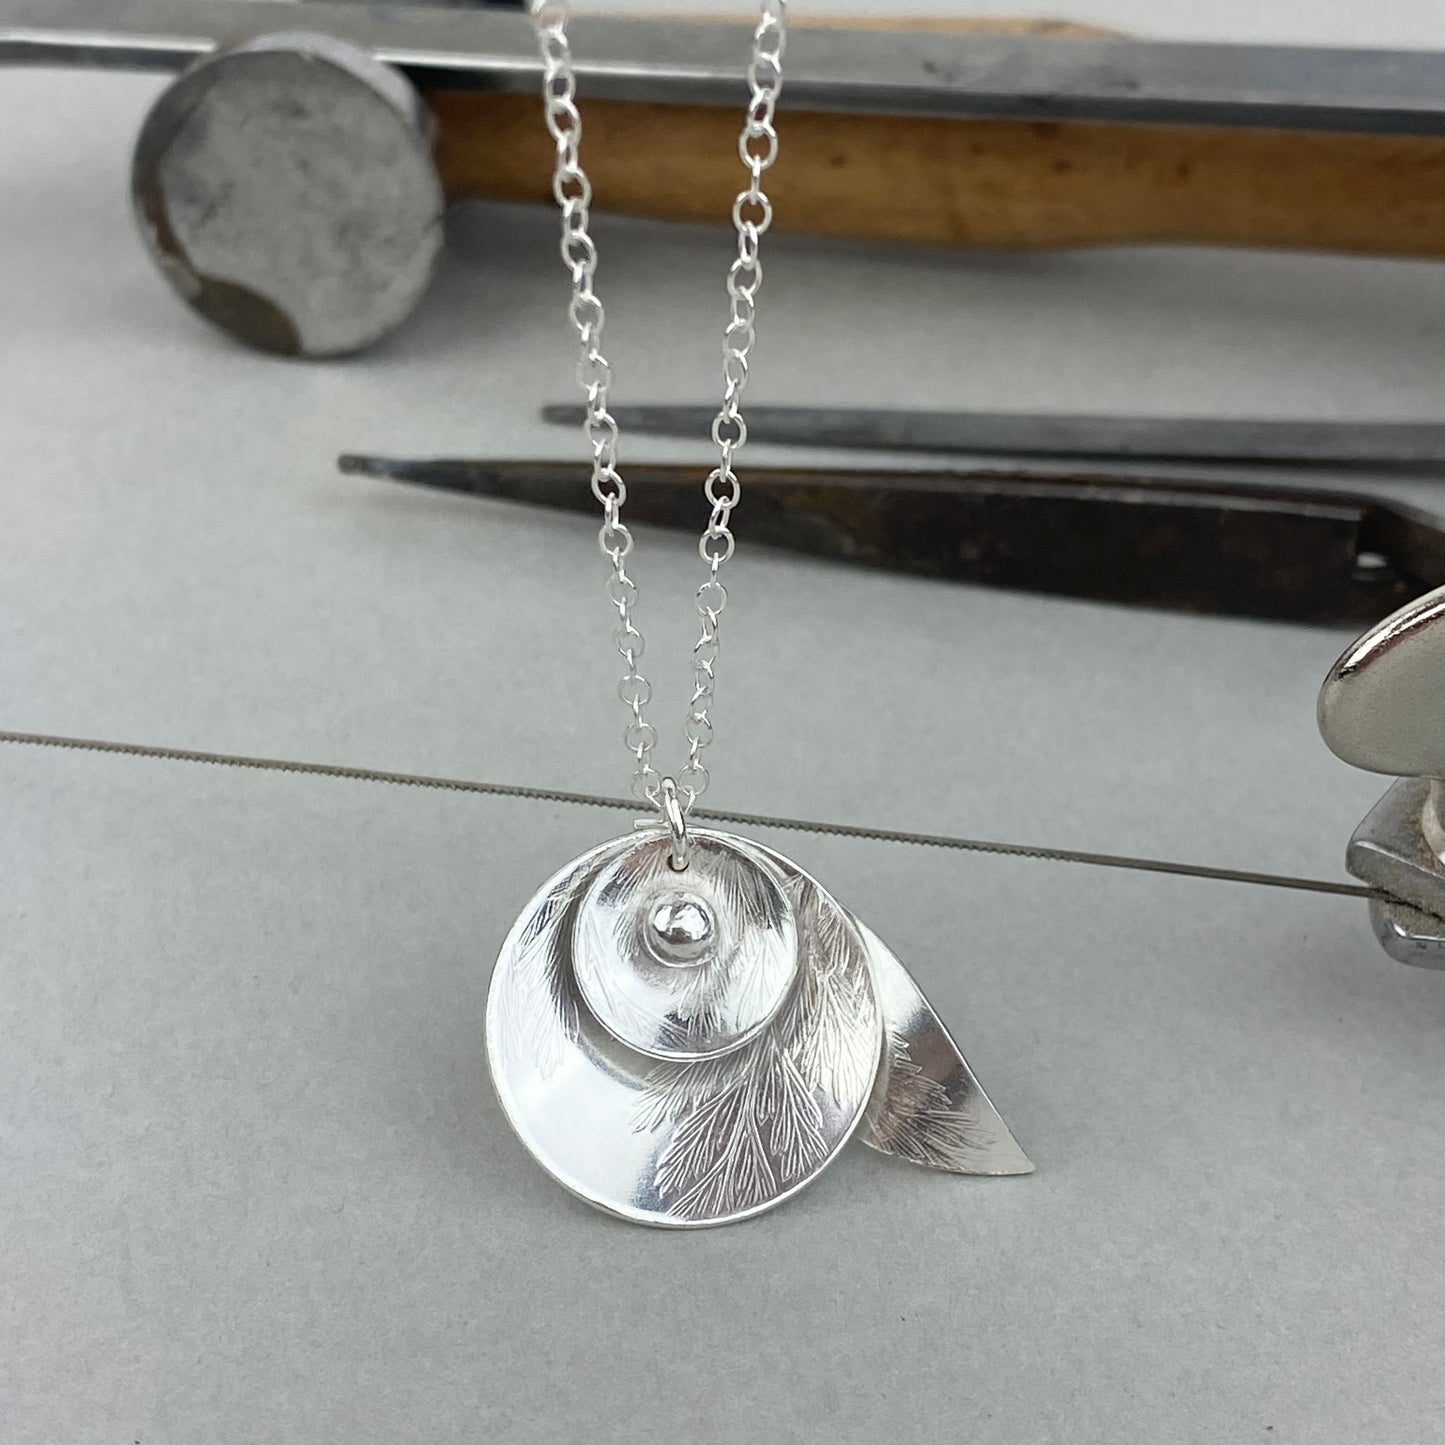 Design Your Own Silver Necklace Friday 17th March 2023 - 10 - 3.30pm